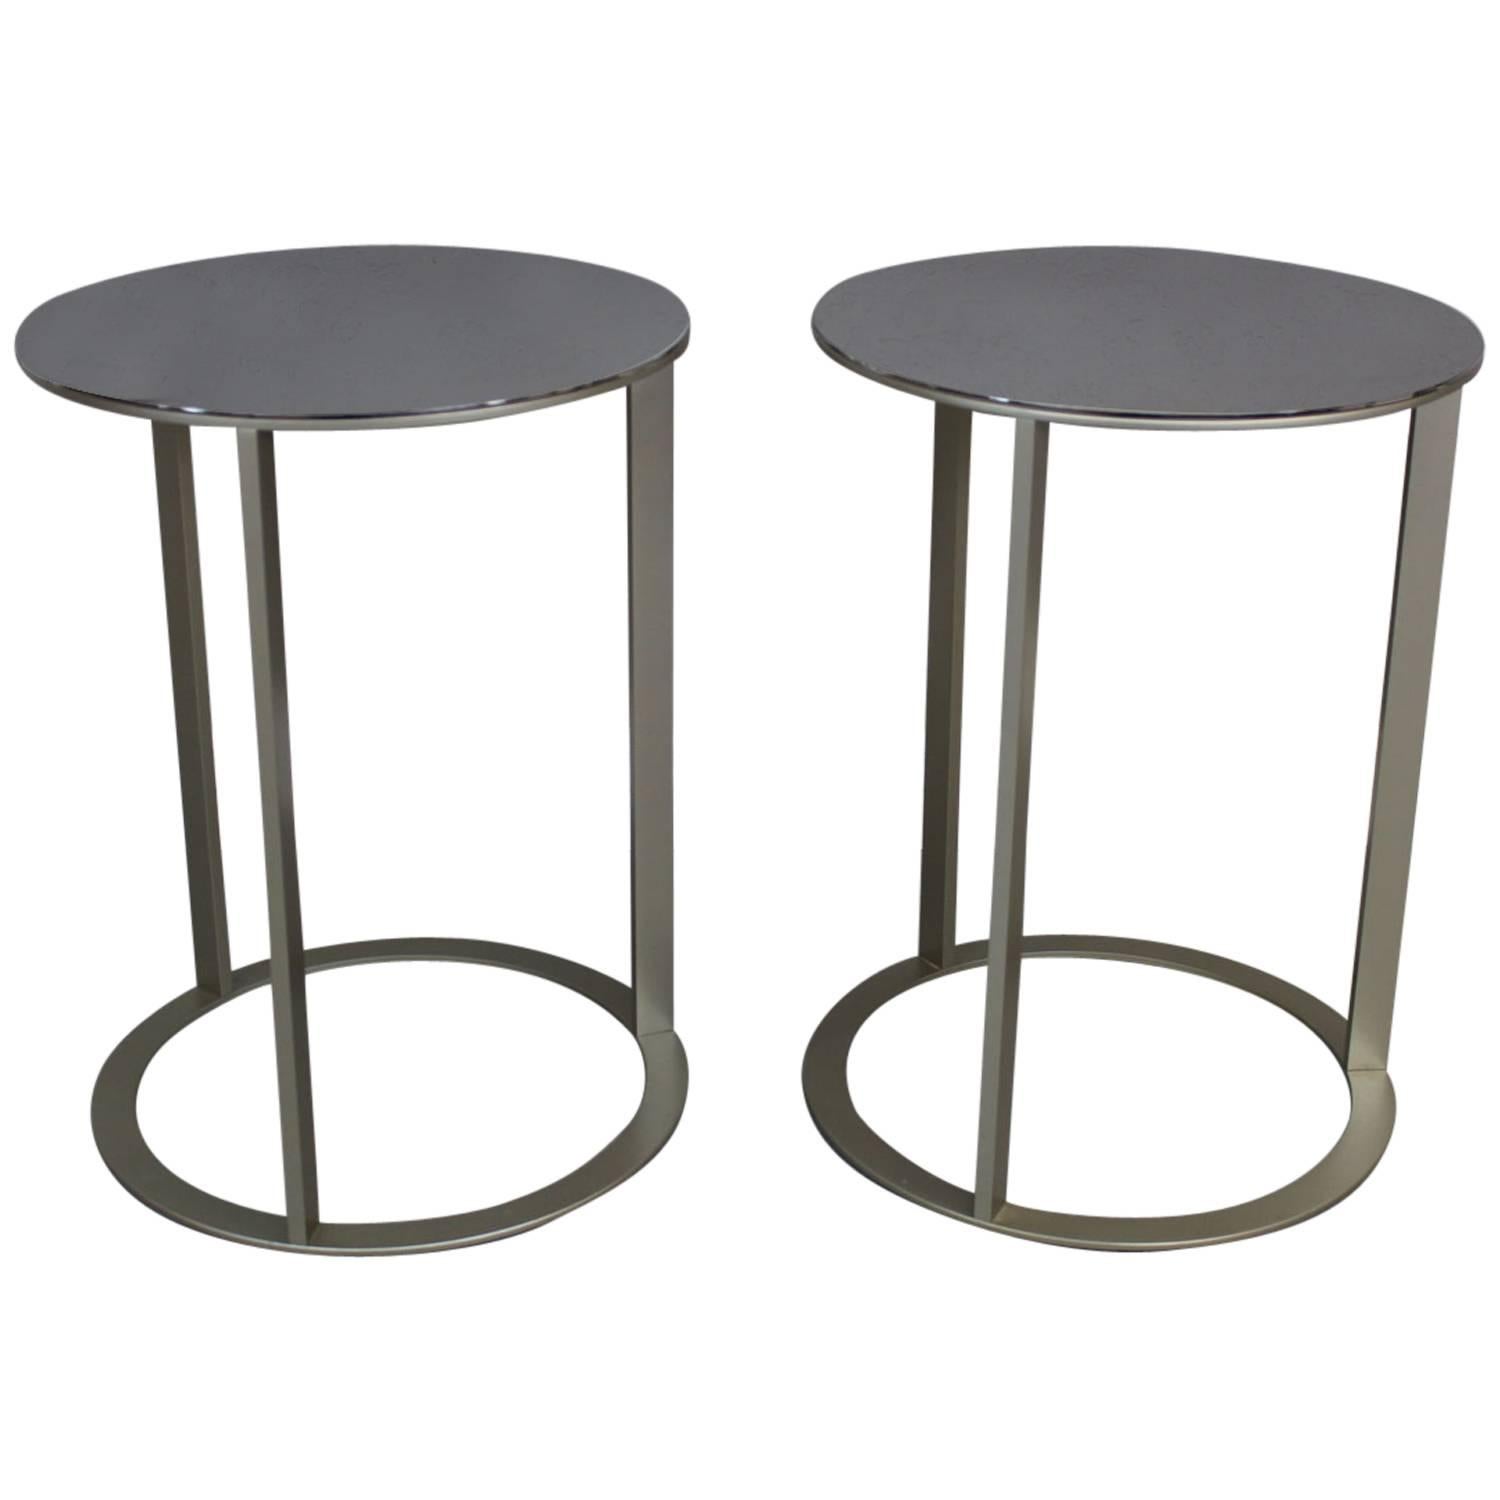 Polished Stainless Steel Table Pair by Antonio Citterio